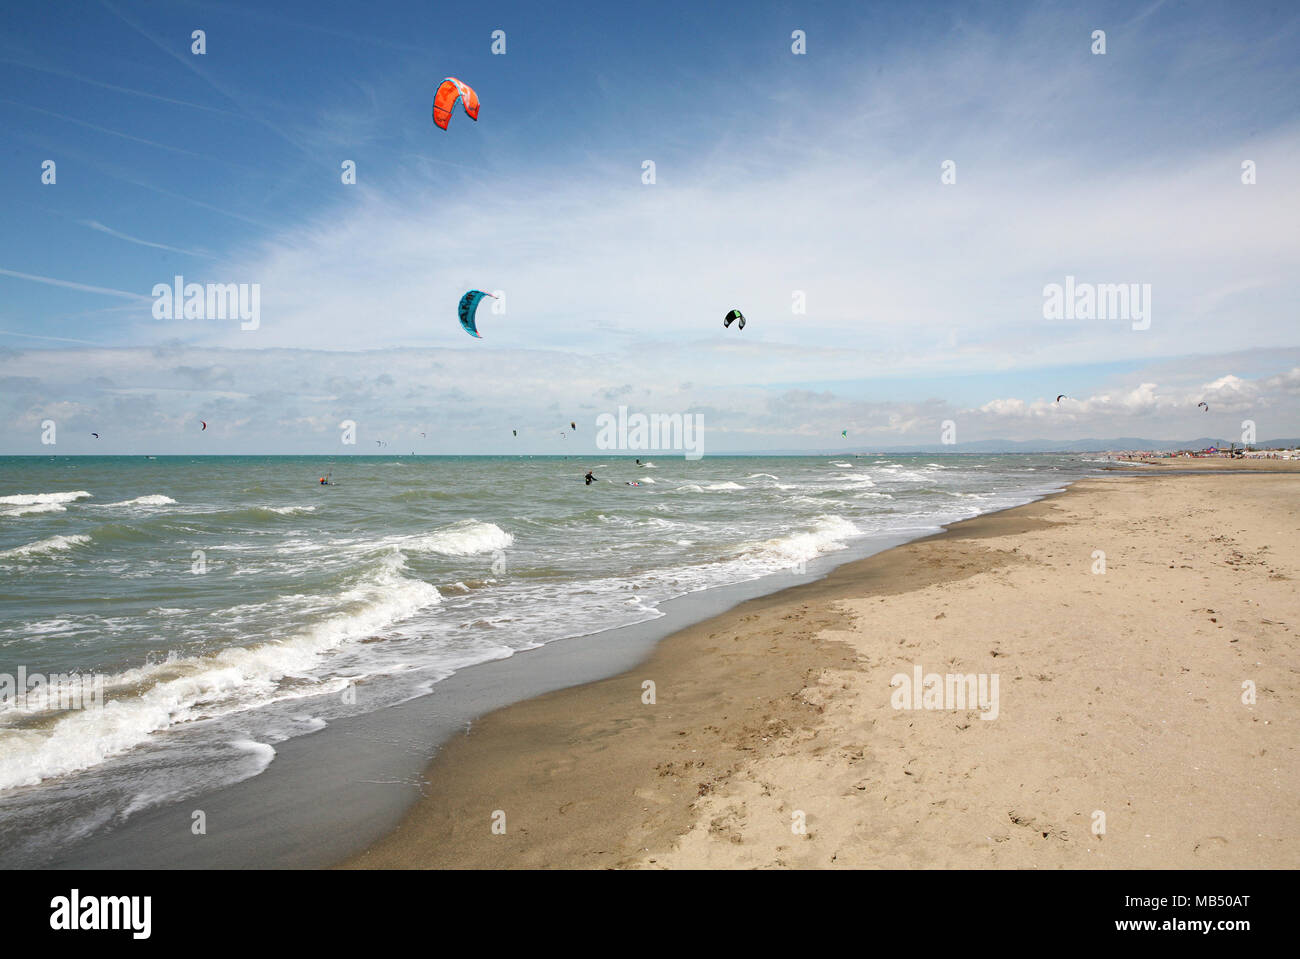 Kite surfers at the large sandy beach Stock Photo